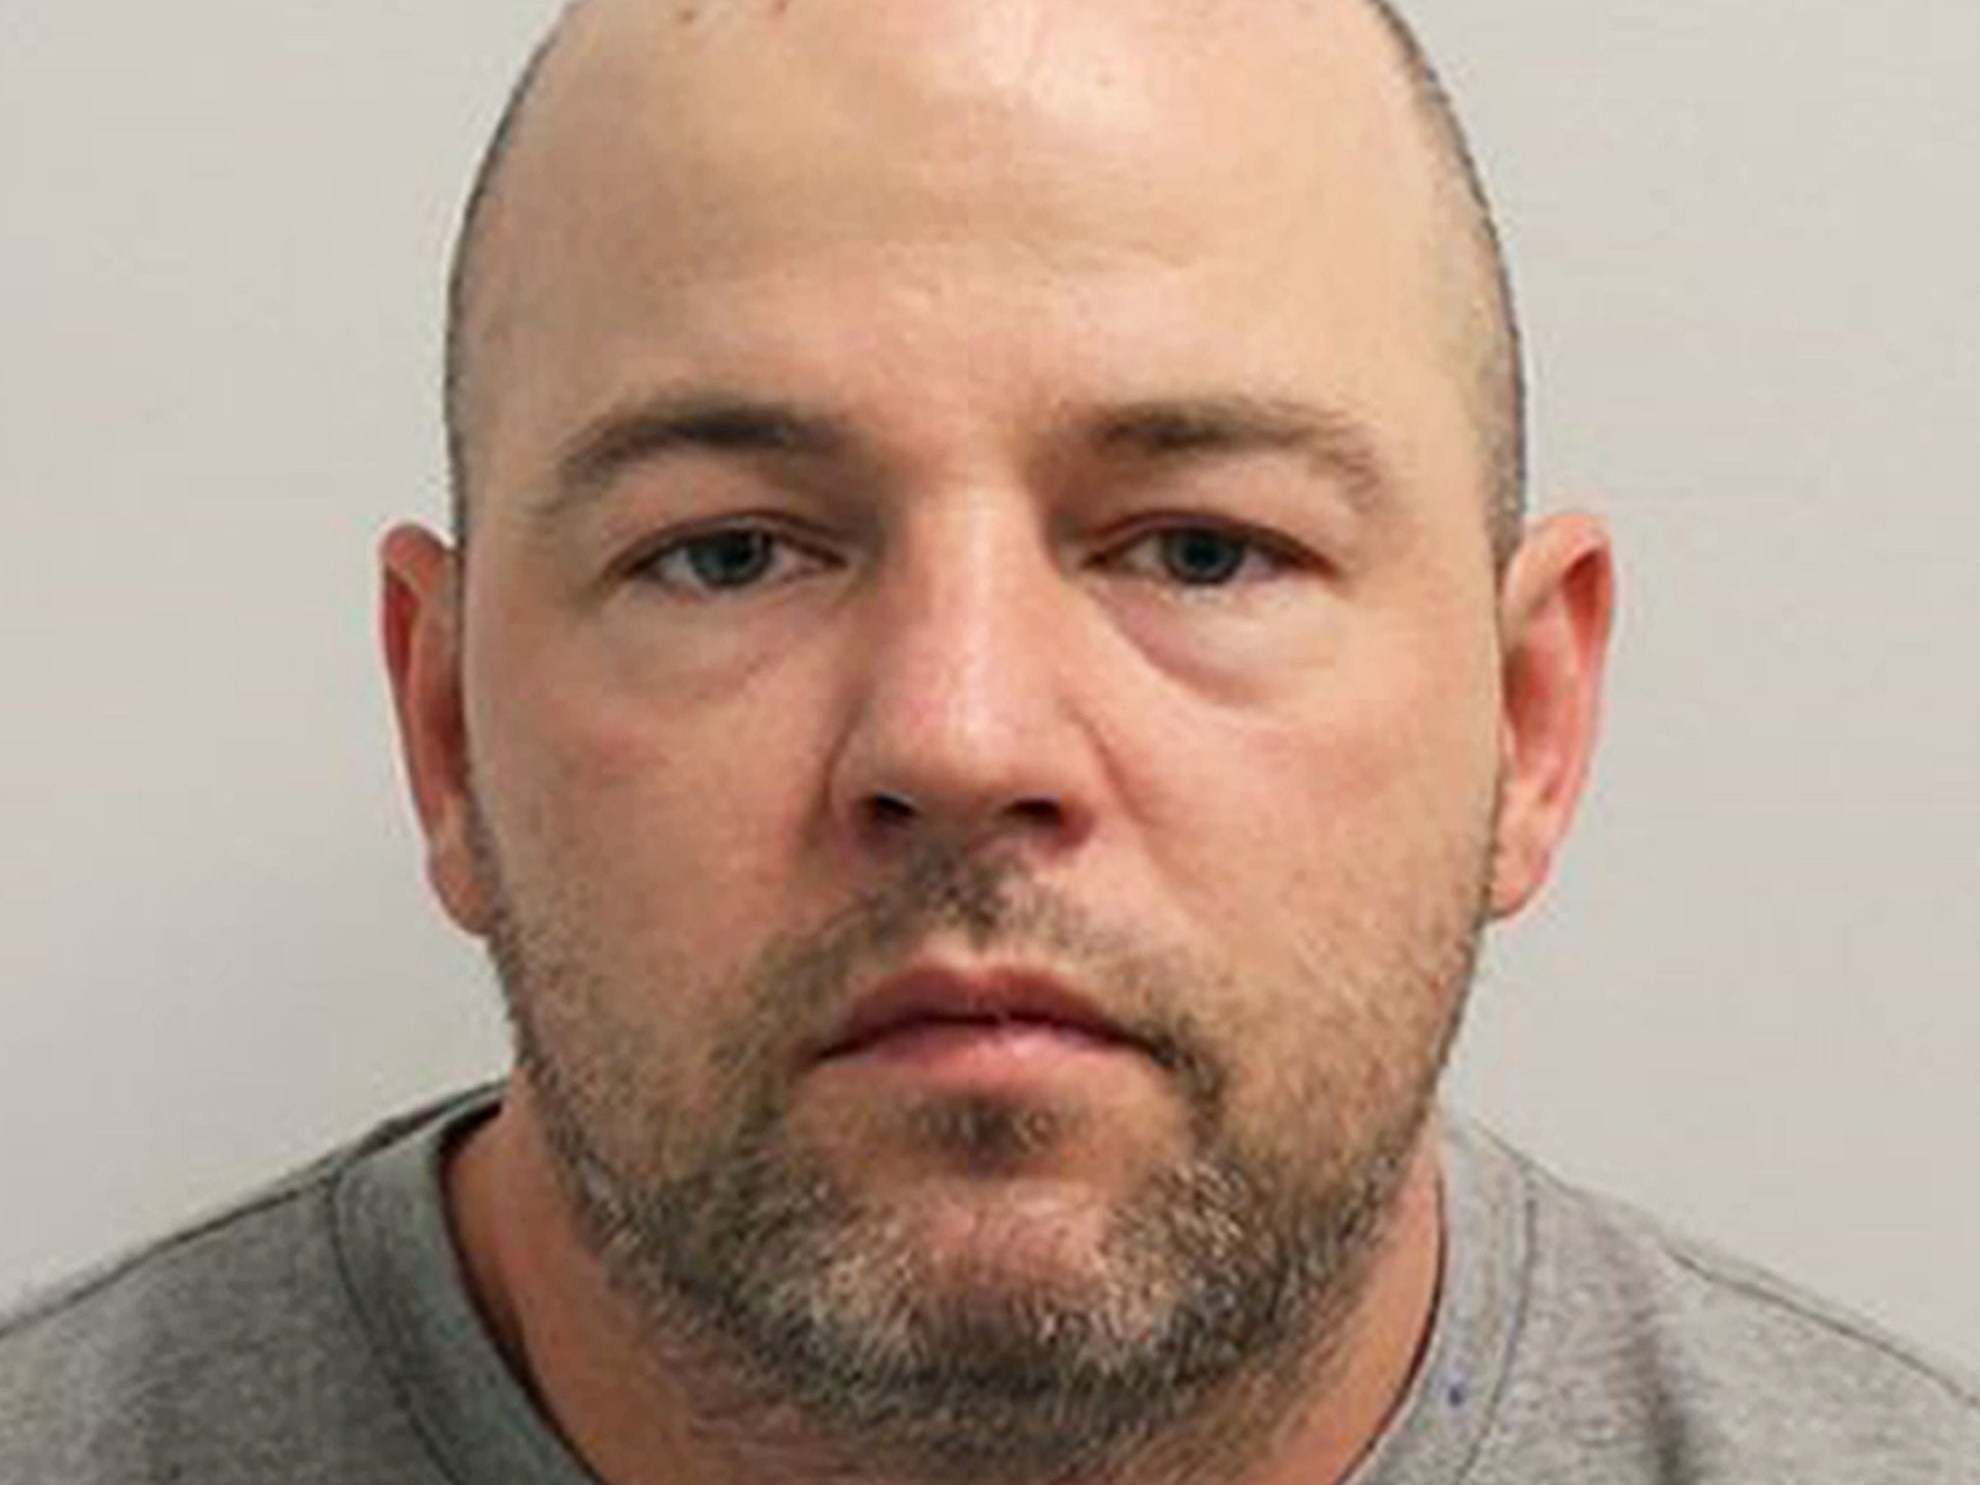 Serial rapist Joseph McCann is among the freed prisoners to have committed serious further offences in 2018-19